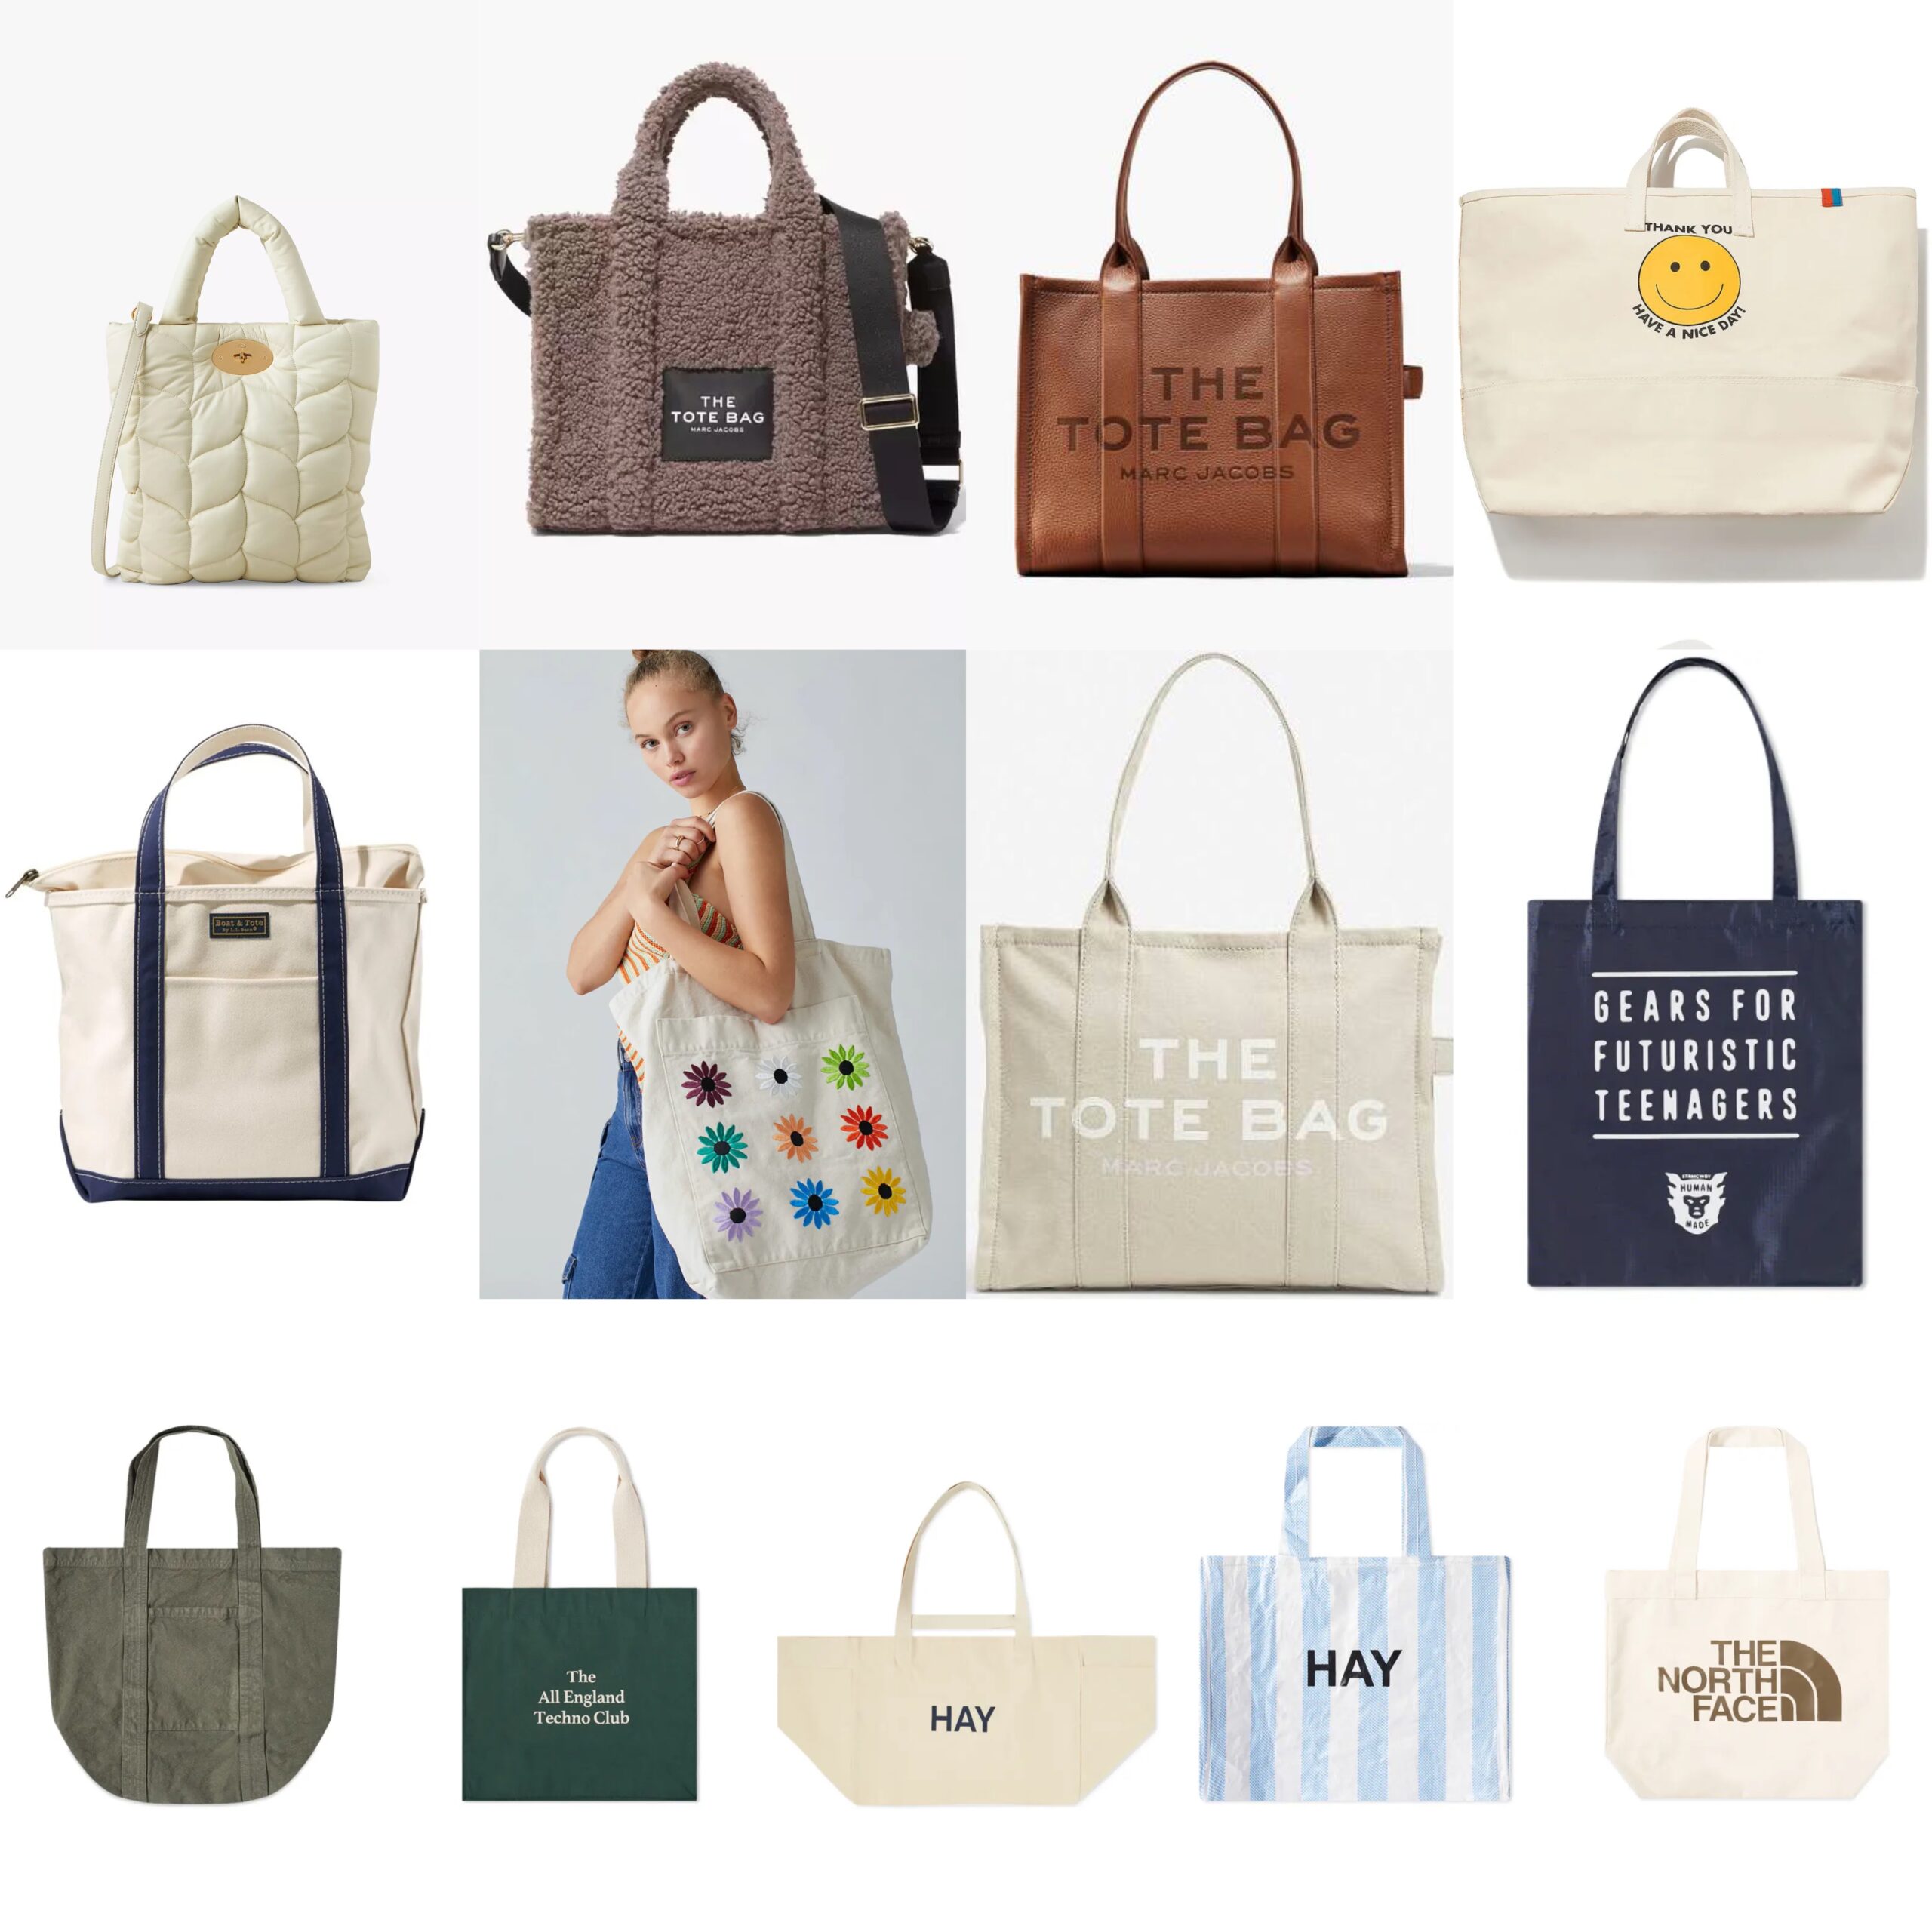 13 Of The Best Tote Bags For Everyday Outfits 2023 - Wake Up For Fashion